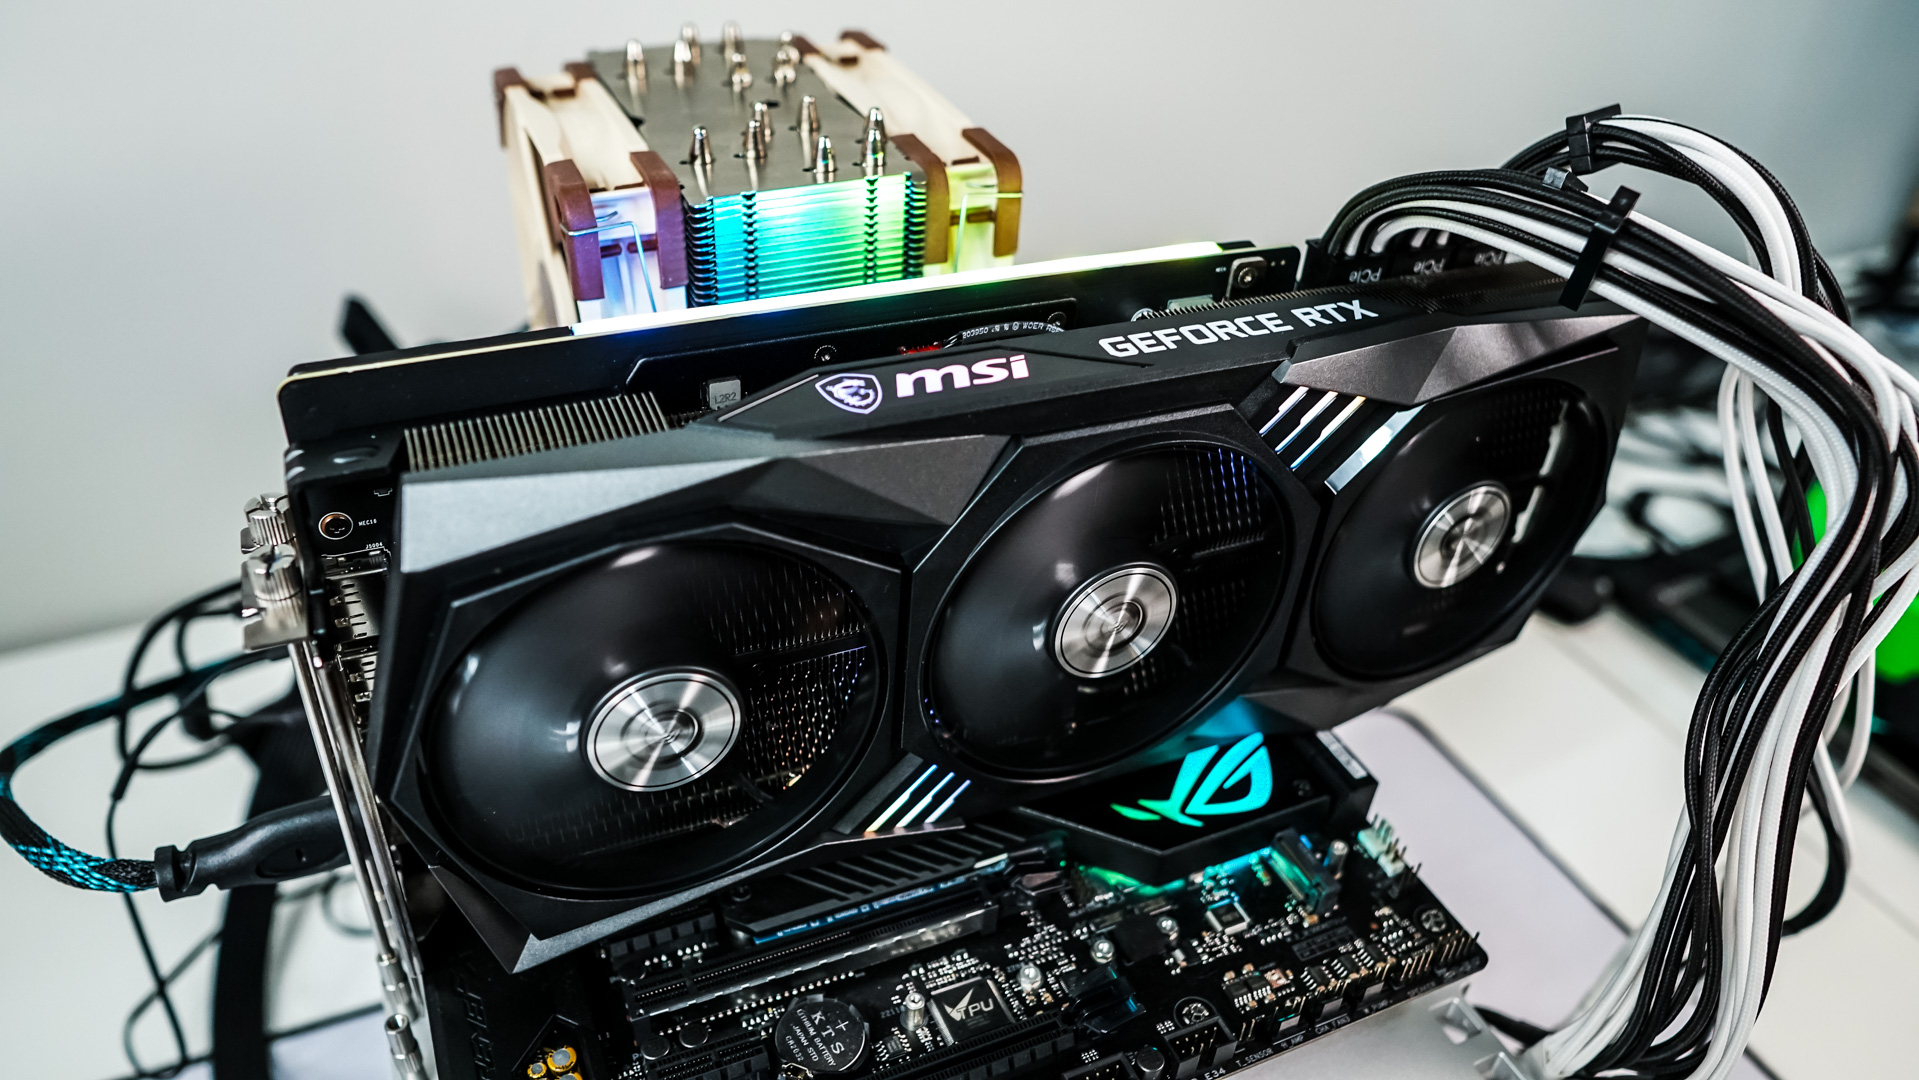 MSI GeForce RTX 3080 Gaming X Trio Graphics Card Review